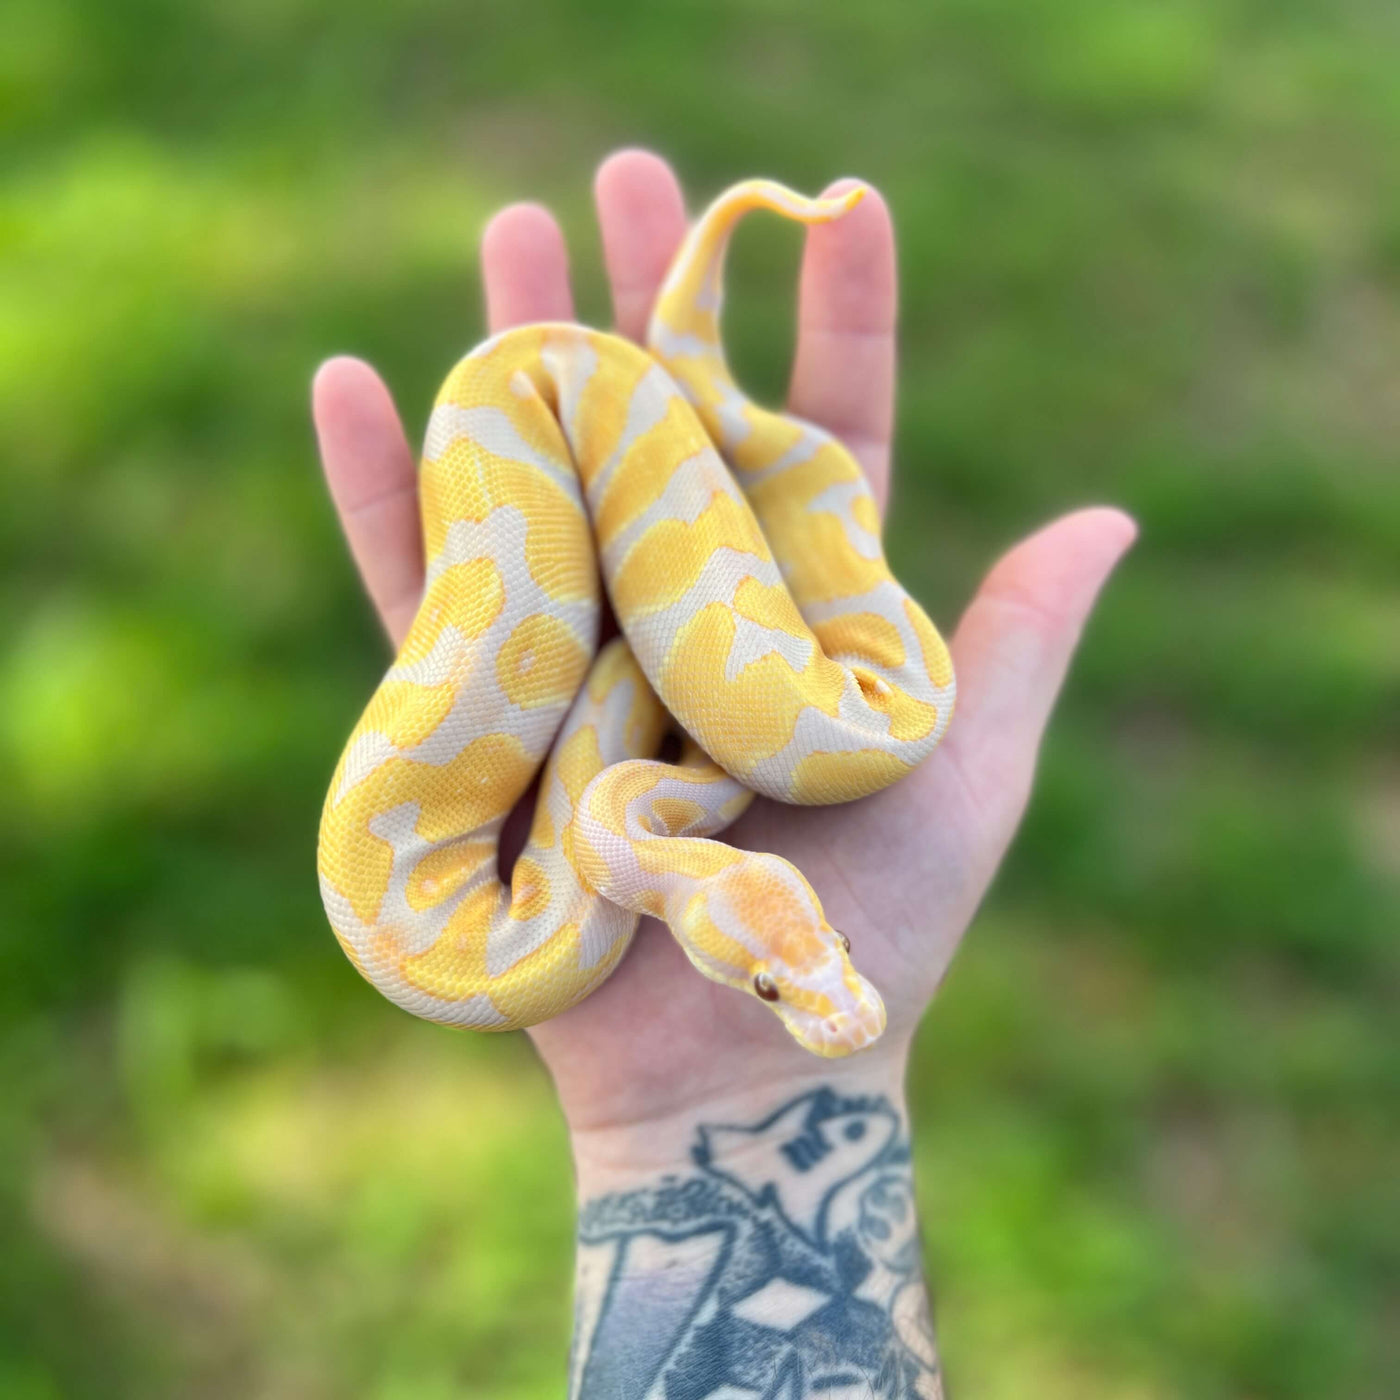 leopard enchi candy ball python for sale online, buy super fire ball pythons at cheap prices